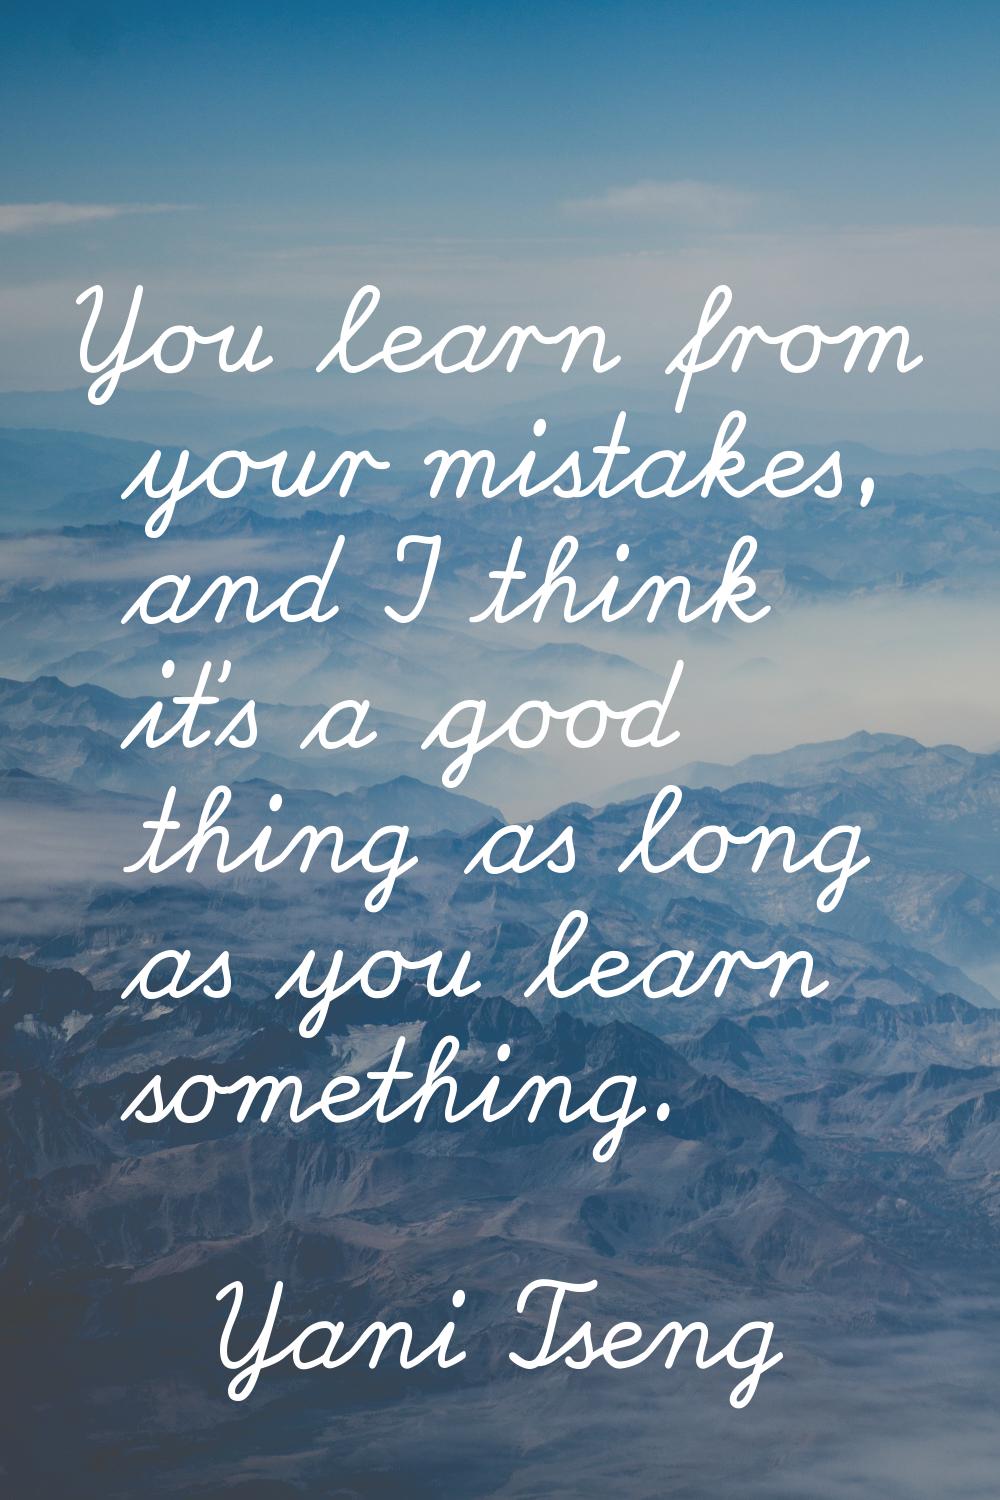 You learn from your mistakes, and I think it's a good thing as long as you learn something.